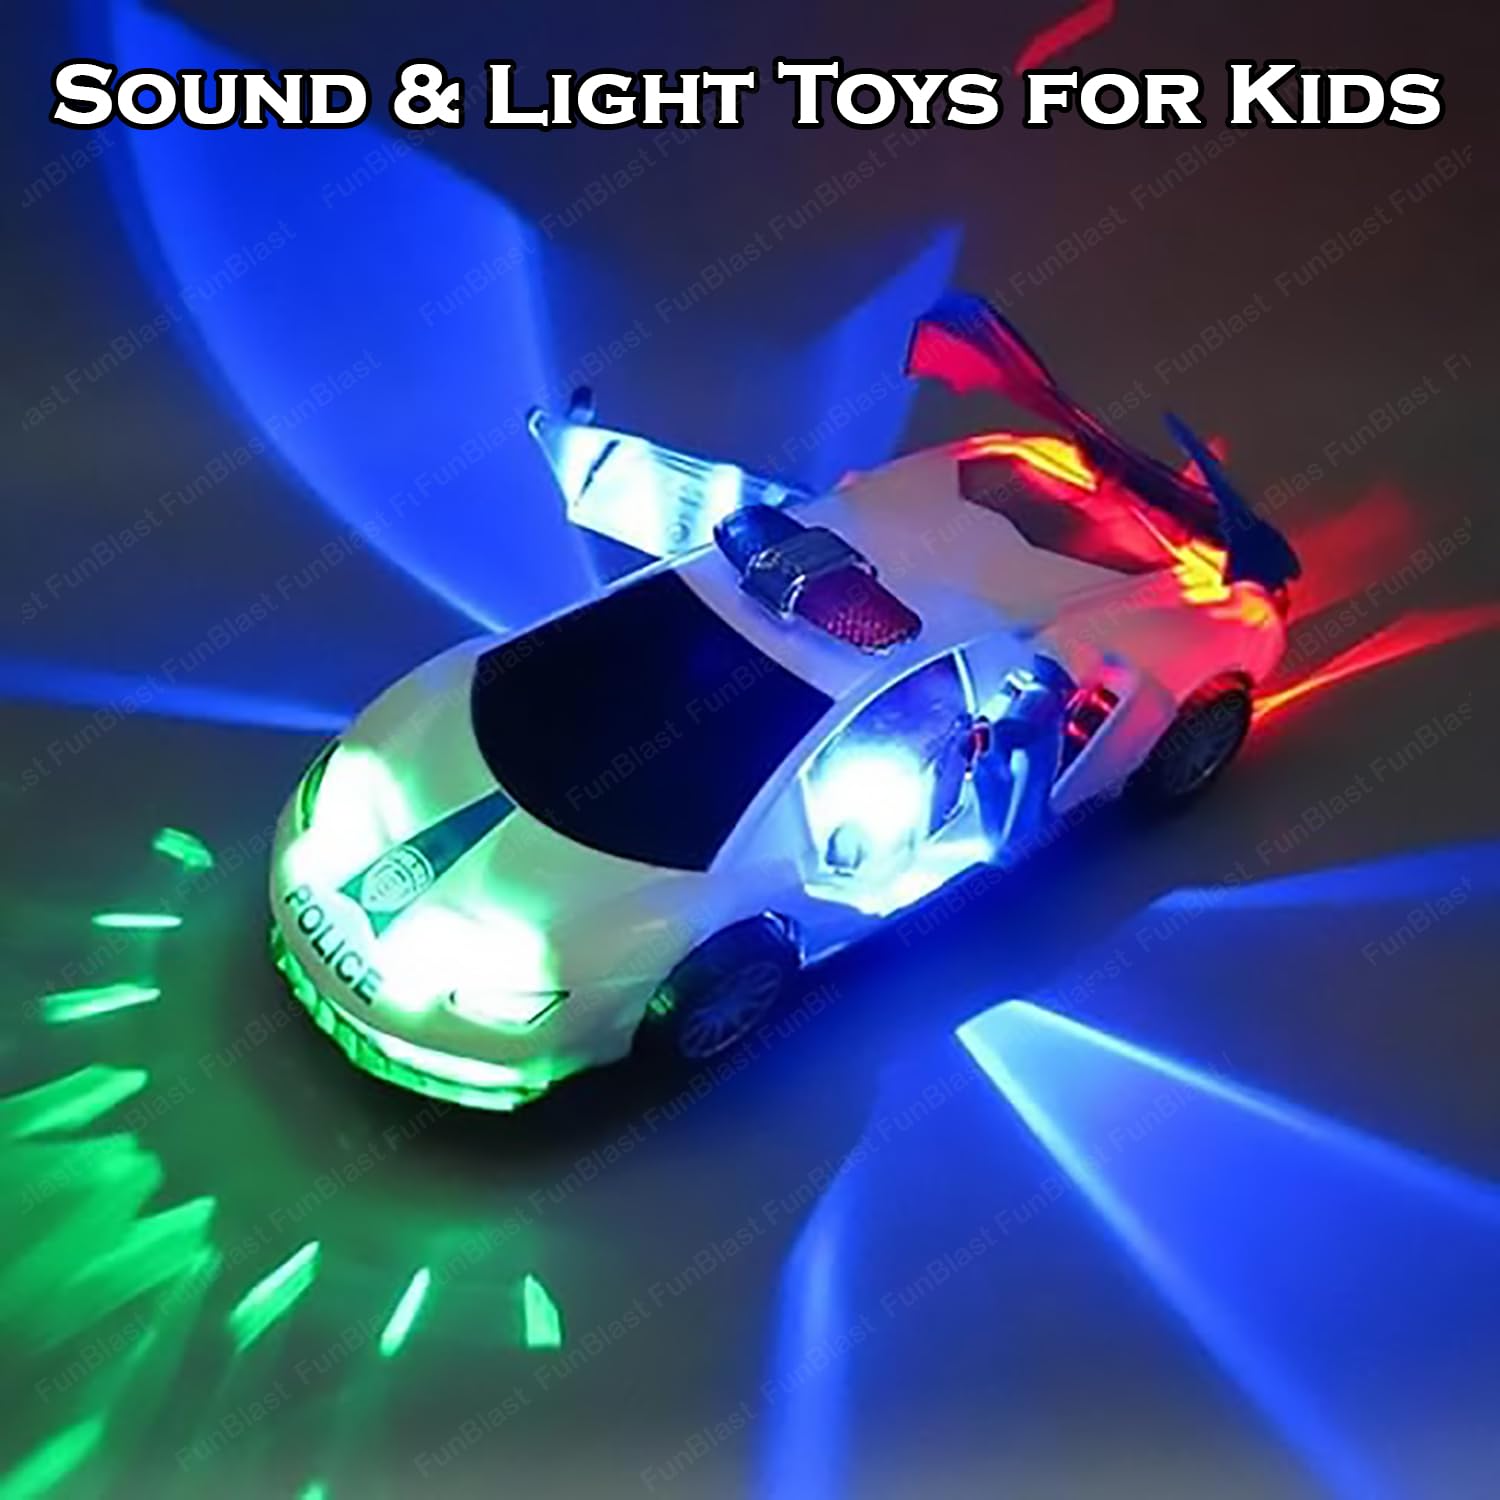 FunBlast Police Car Toy – Toy Car for Kids with 360 Degree